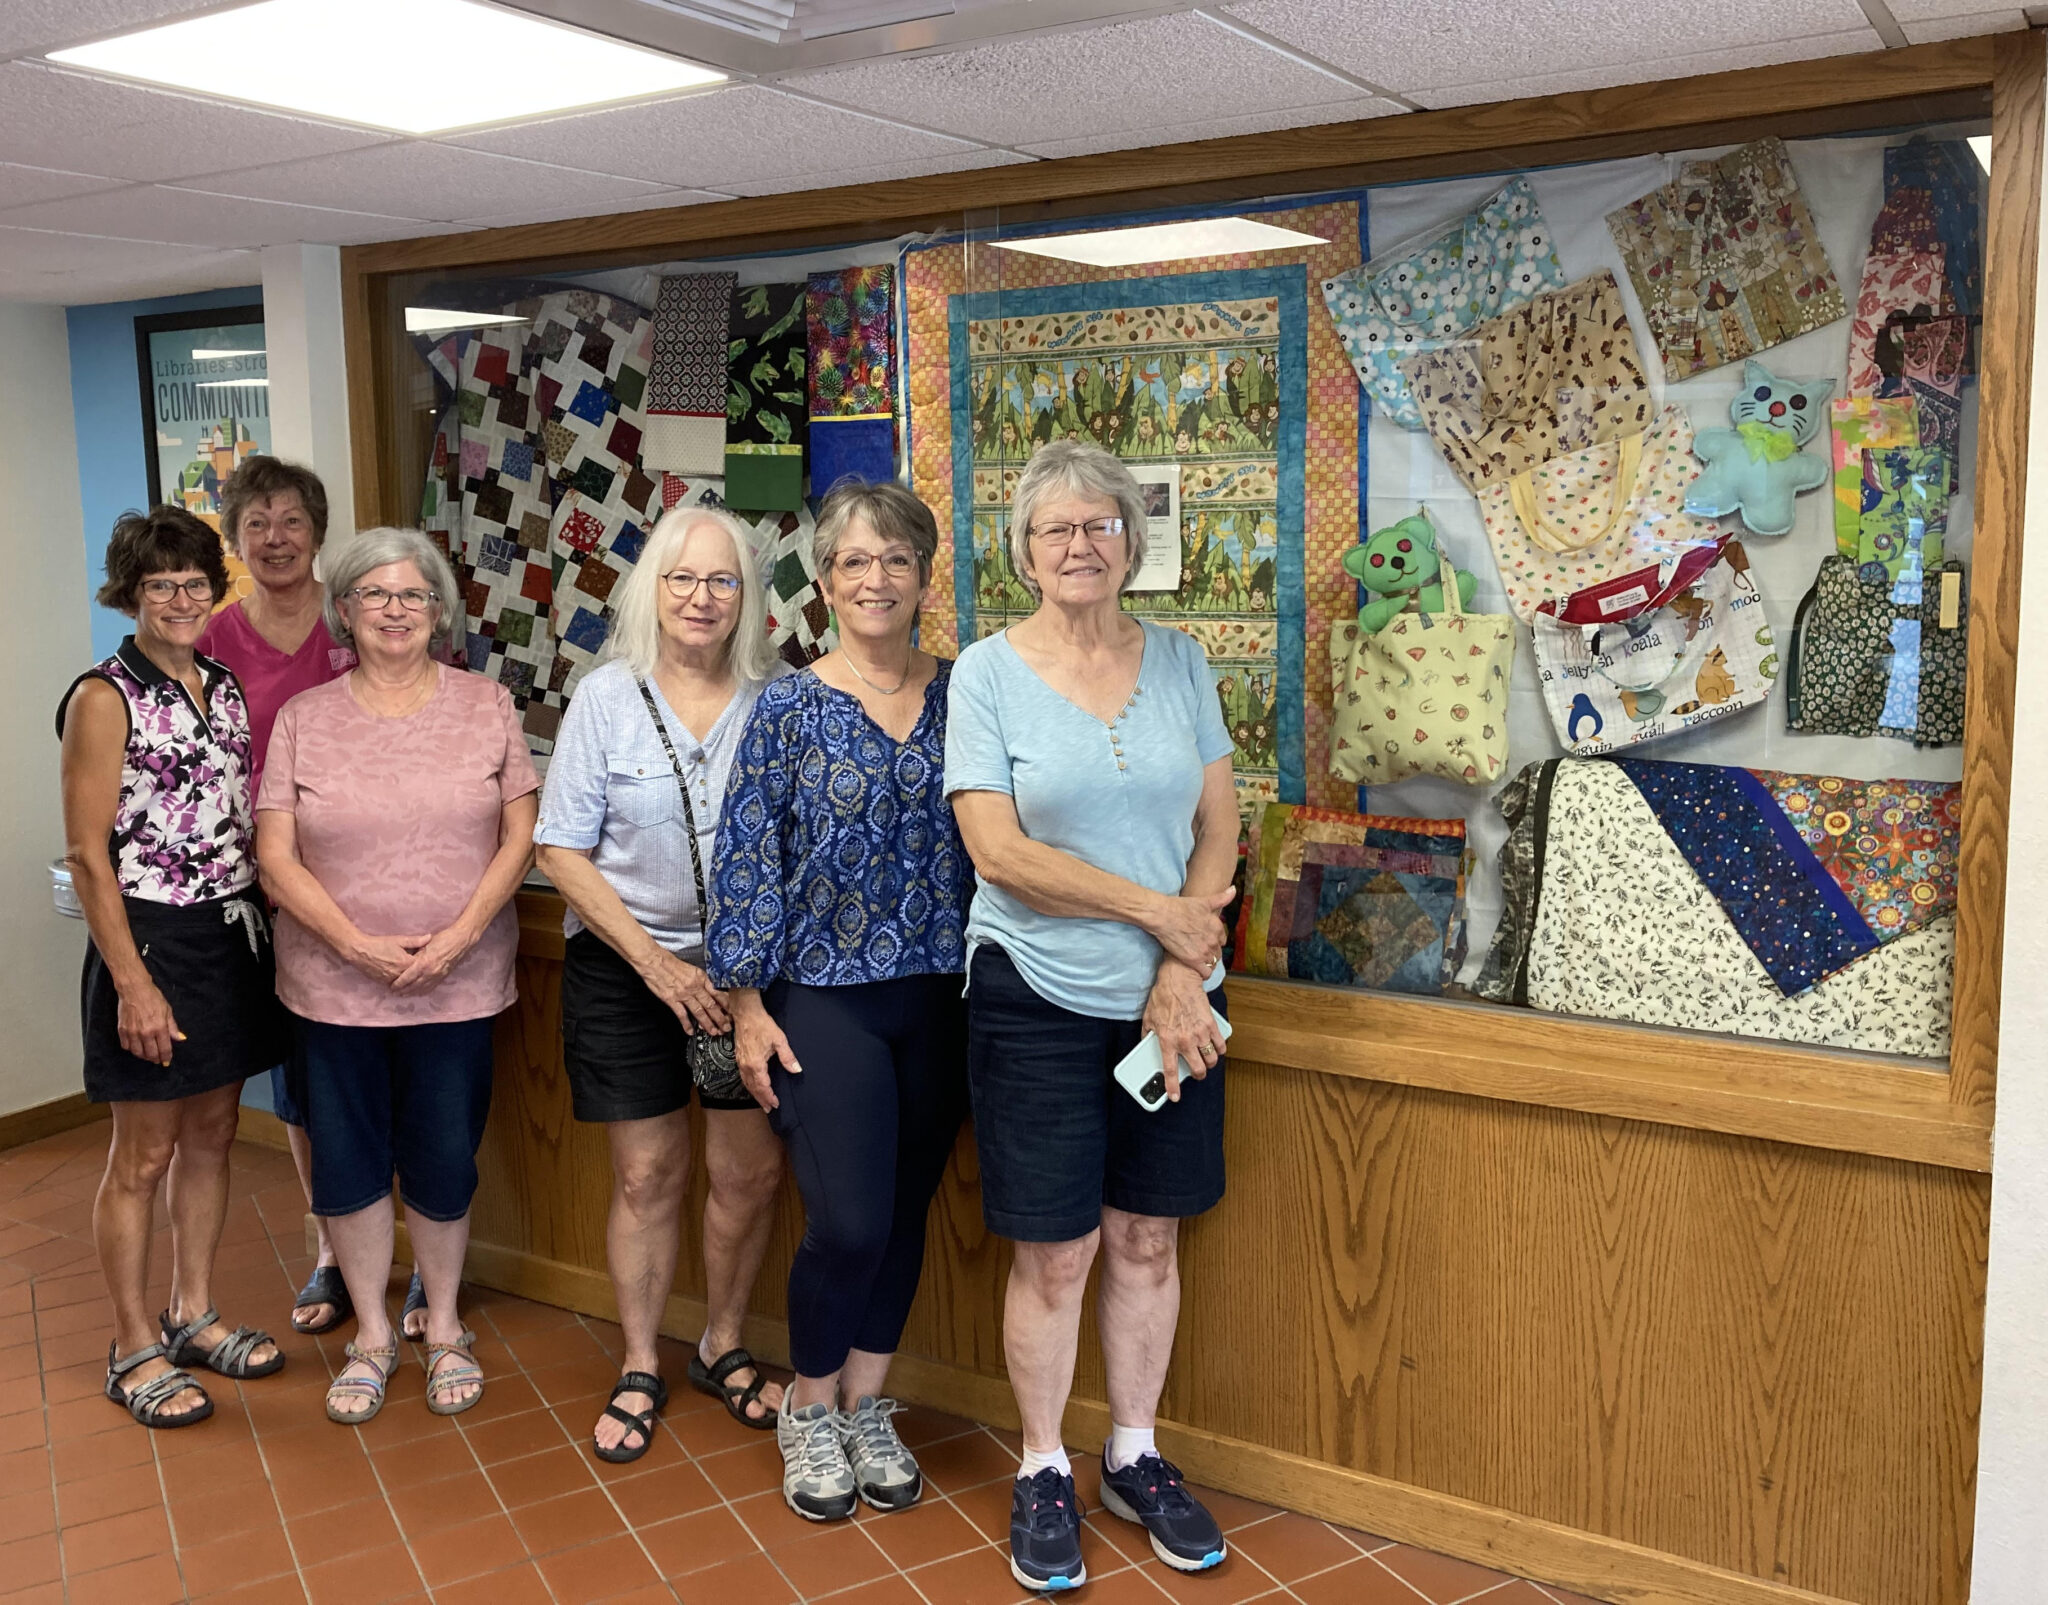 Display at Tomahawk Public Library highlights Four Rivers Quilt Guild